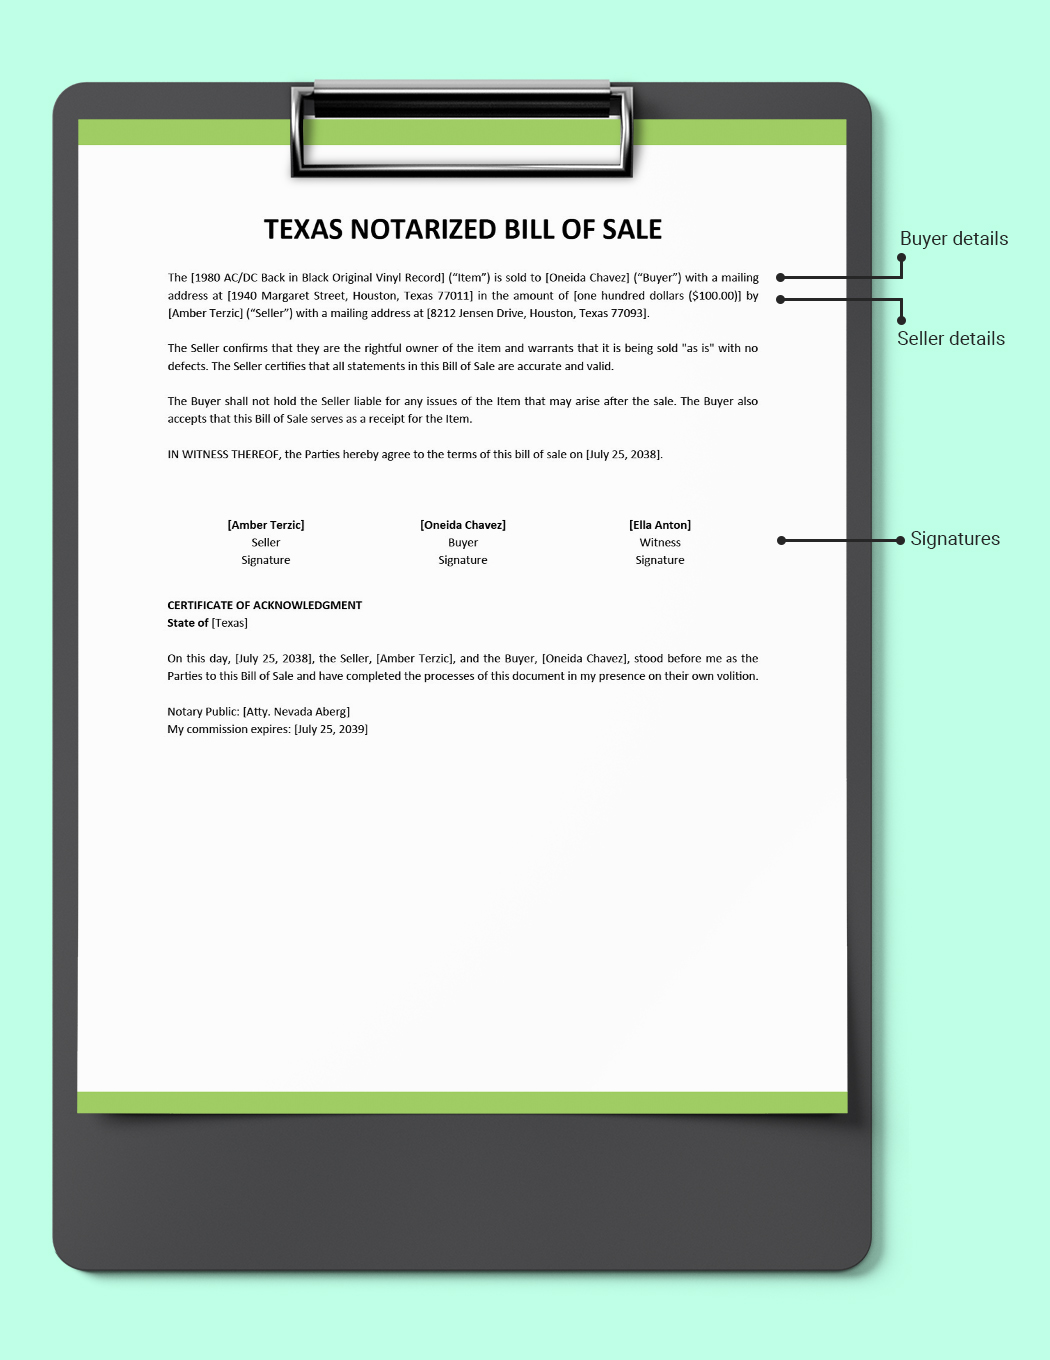 Texas Notarized Bill of Sale Template